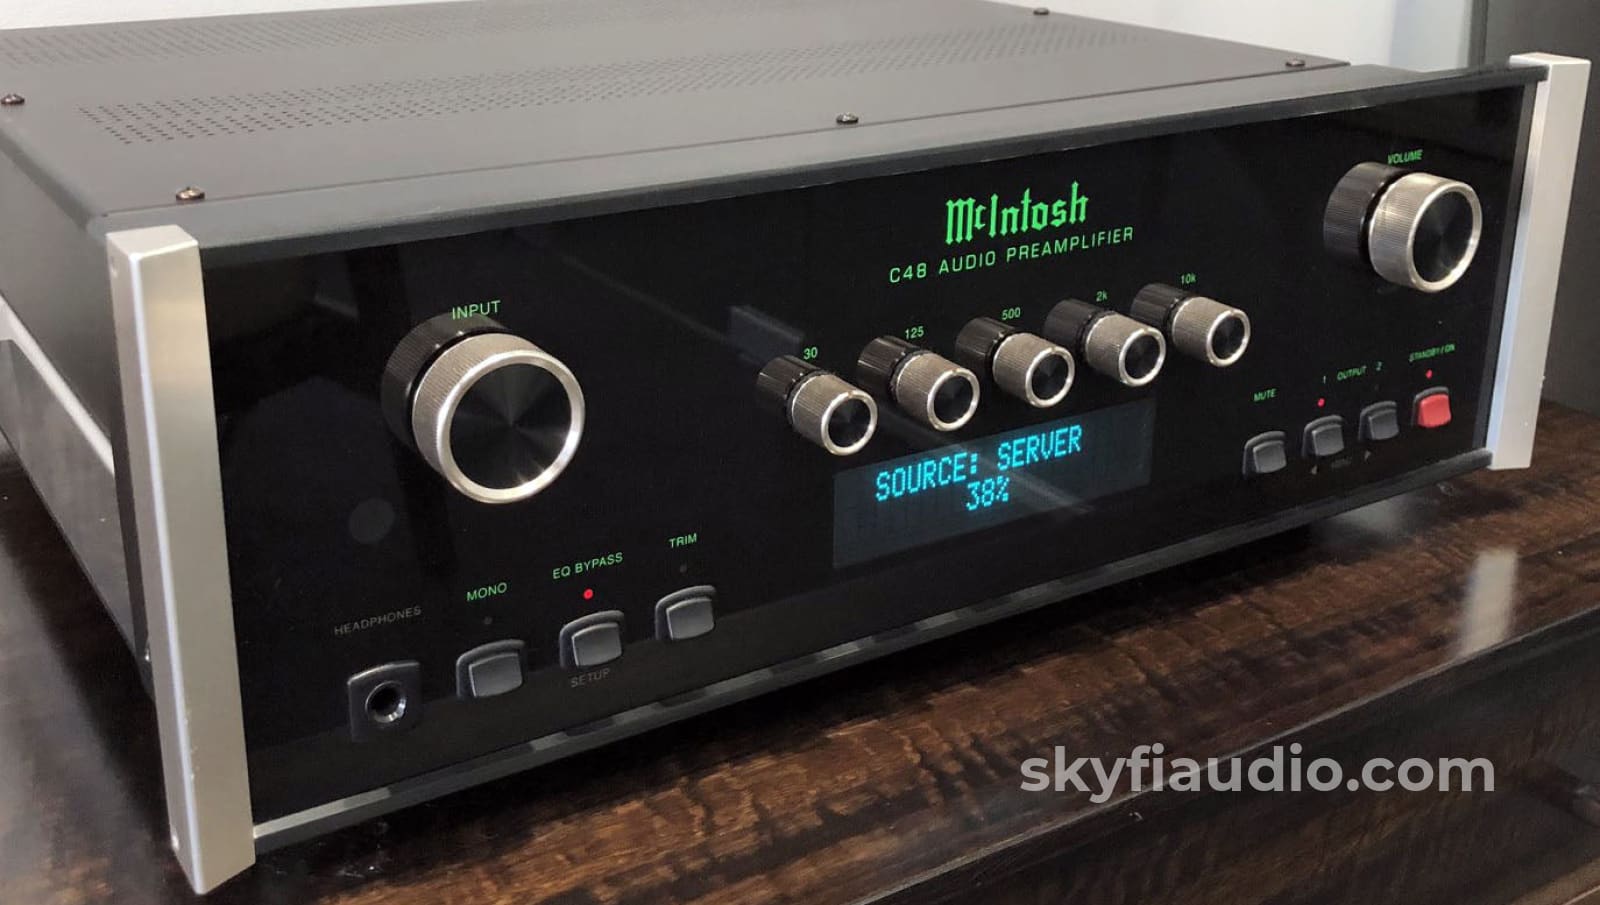 McIntosh C48 Preamp with DAC - Complete Package